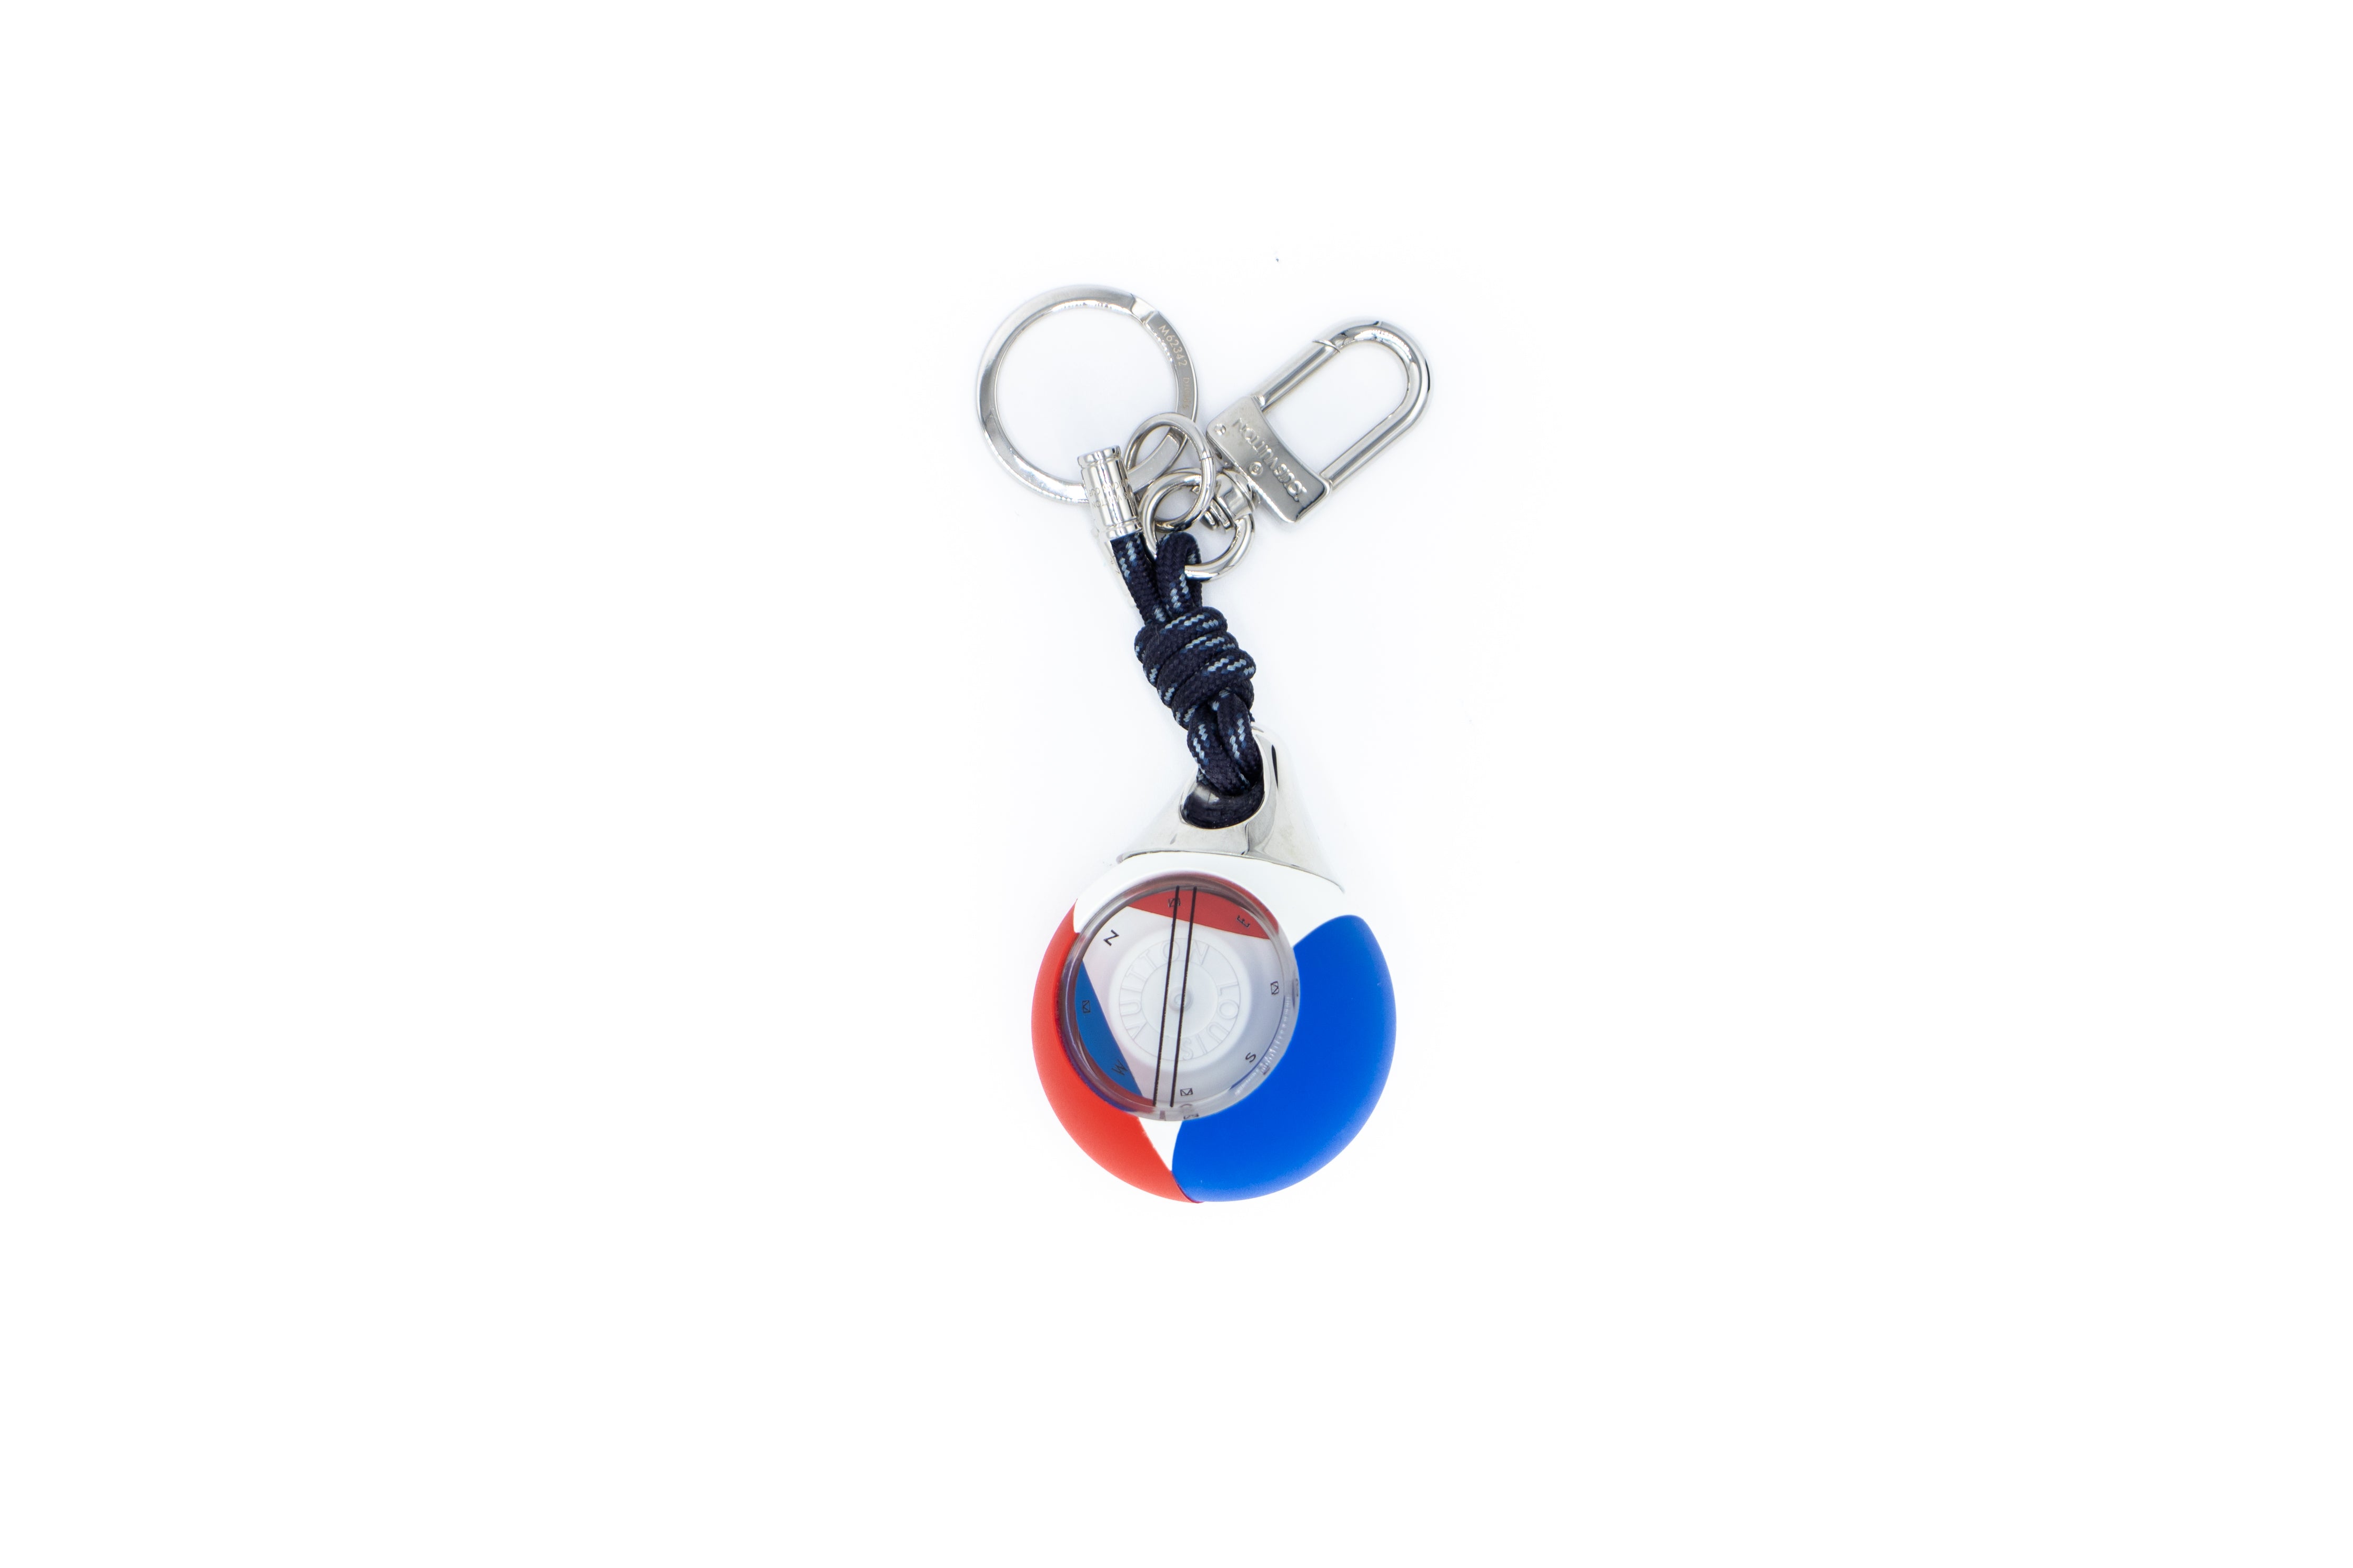 LOUIS VUITTON AMERICA'S CUP COMPASS KEYCHAIN